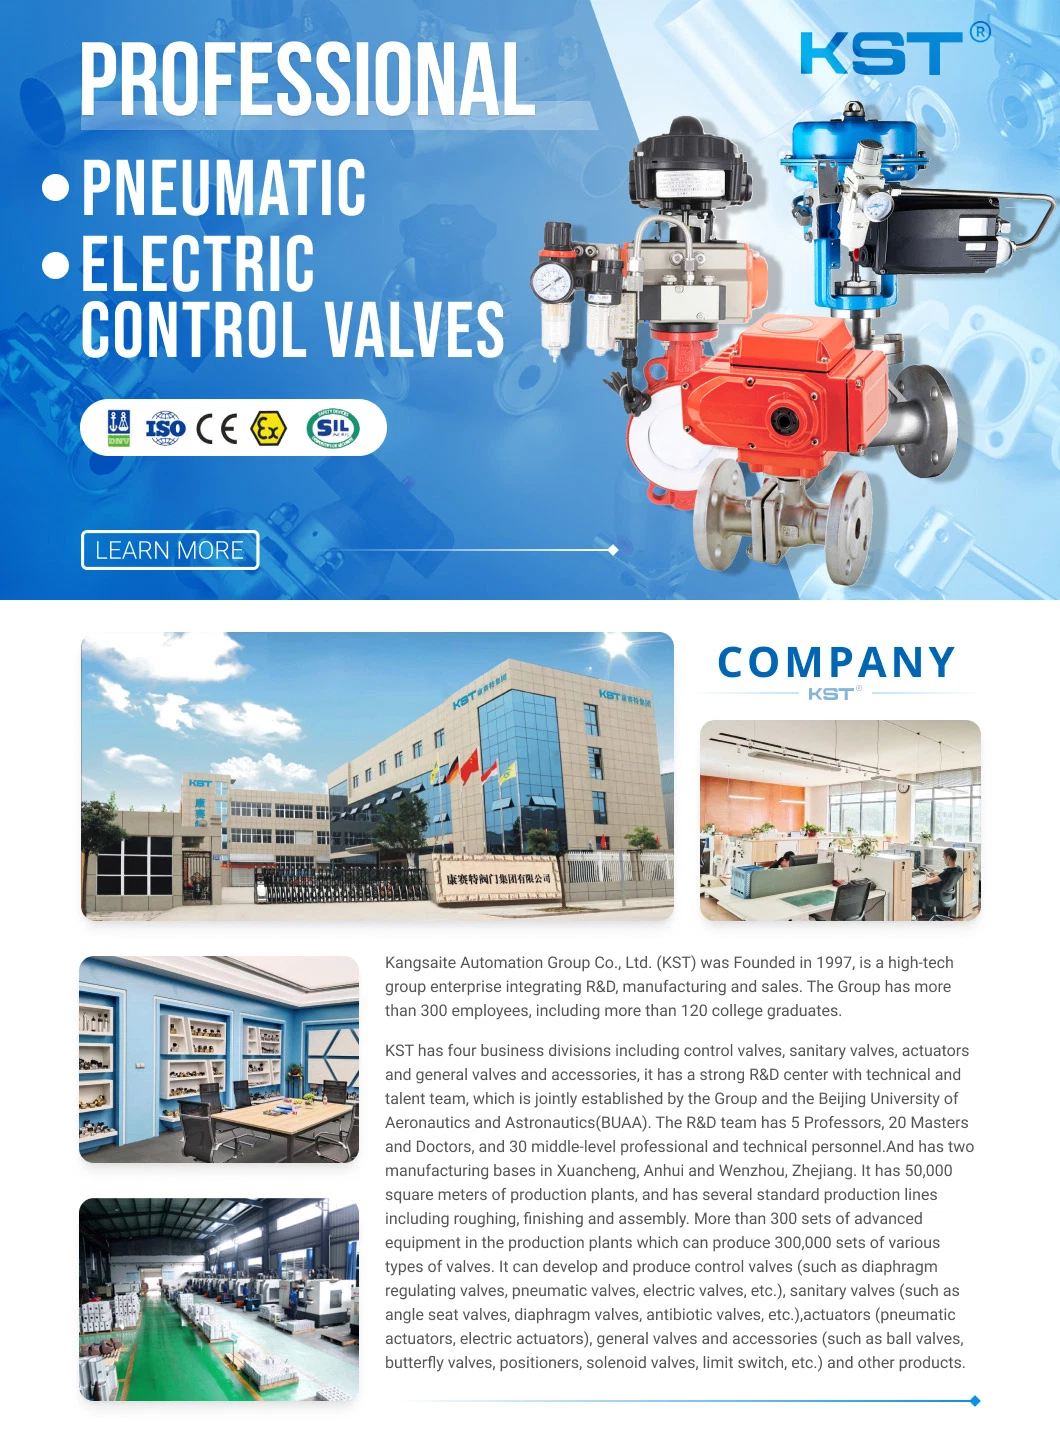 Sanitary Clamped Stainless Steel 316L Diaphragm Valve for Pharmacy with Manual Hand//Electric Actuator/Pneumatic/DIN/SMS/3A SS304 SS316L